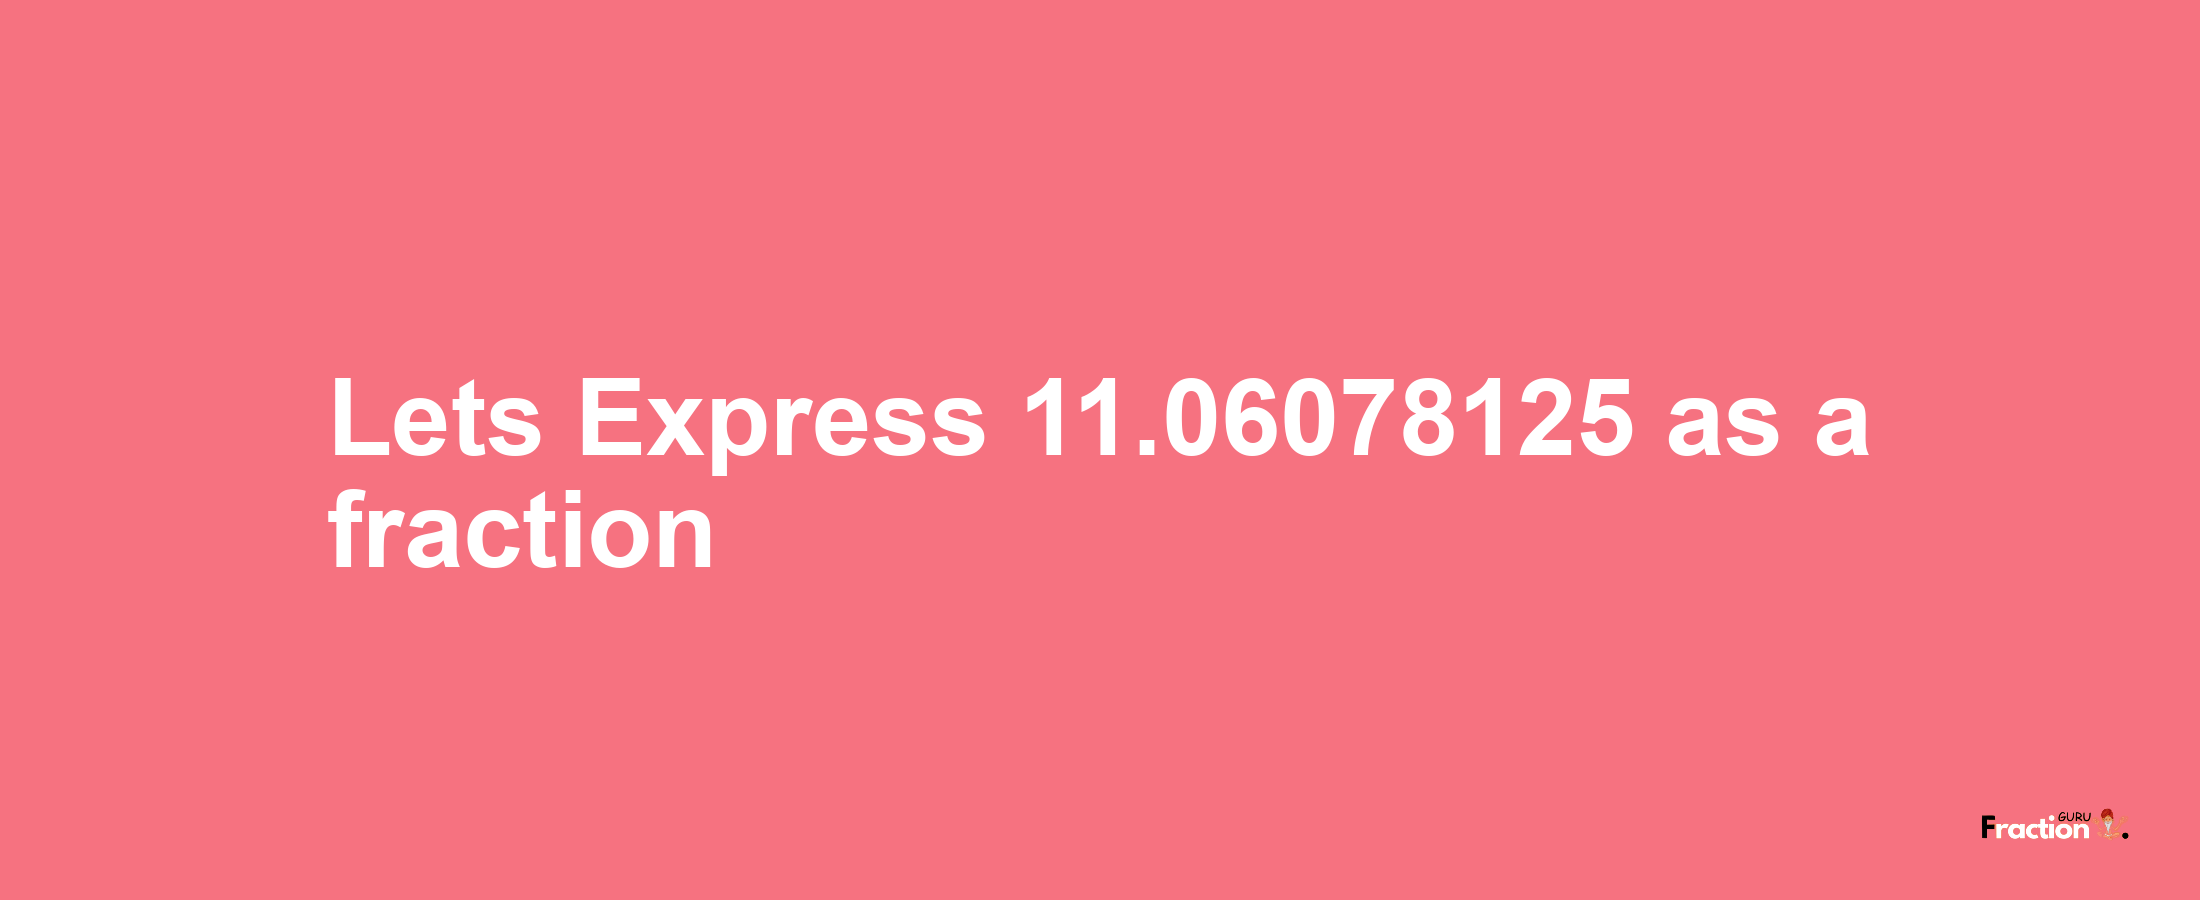 Lets Express 11.06078125 as afraction